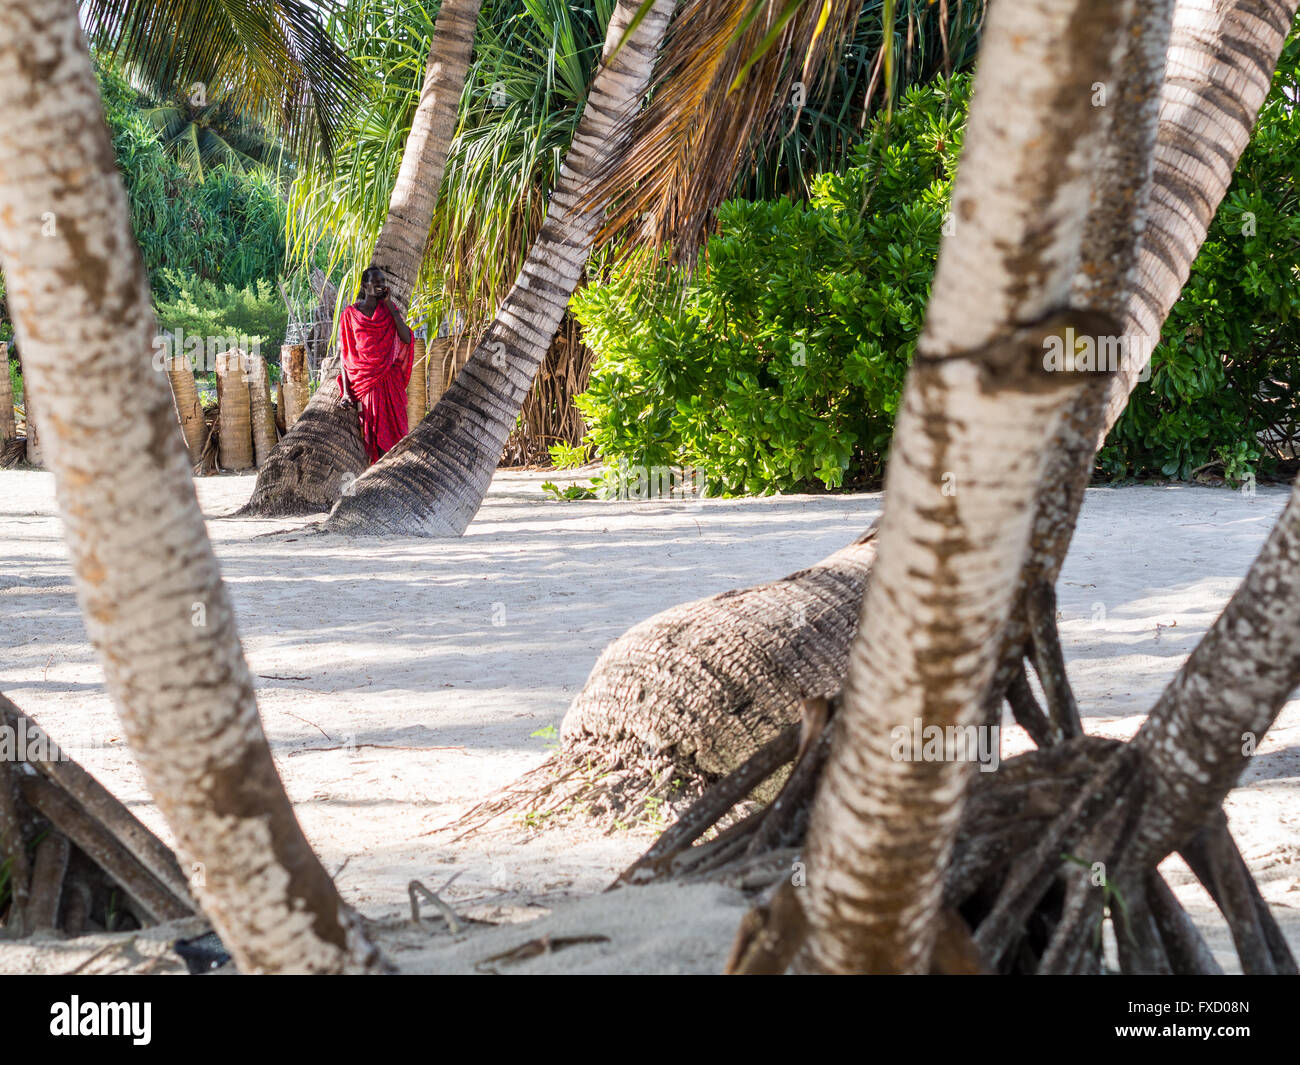 Masai warrior working as a security guard for one of the resorts talks on the phone on a beach. Stock Photo